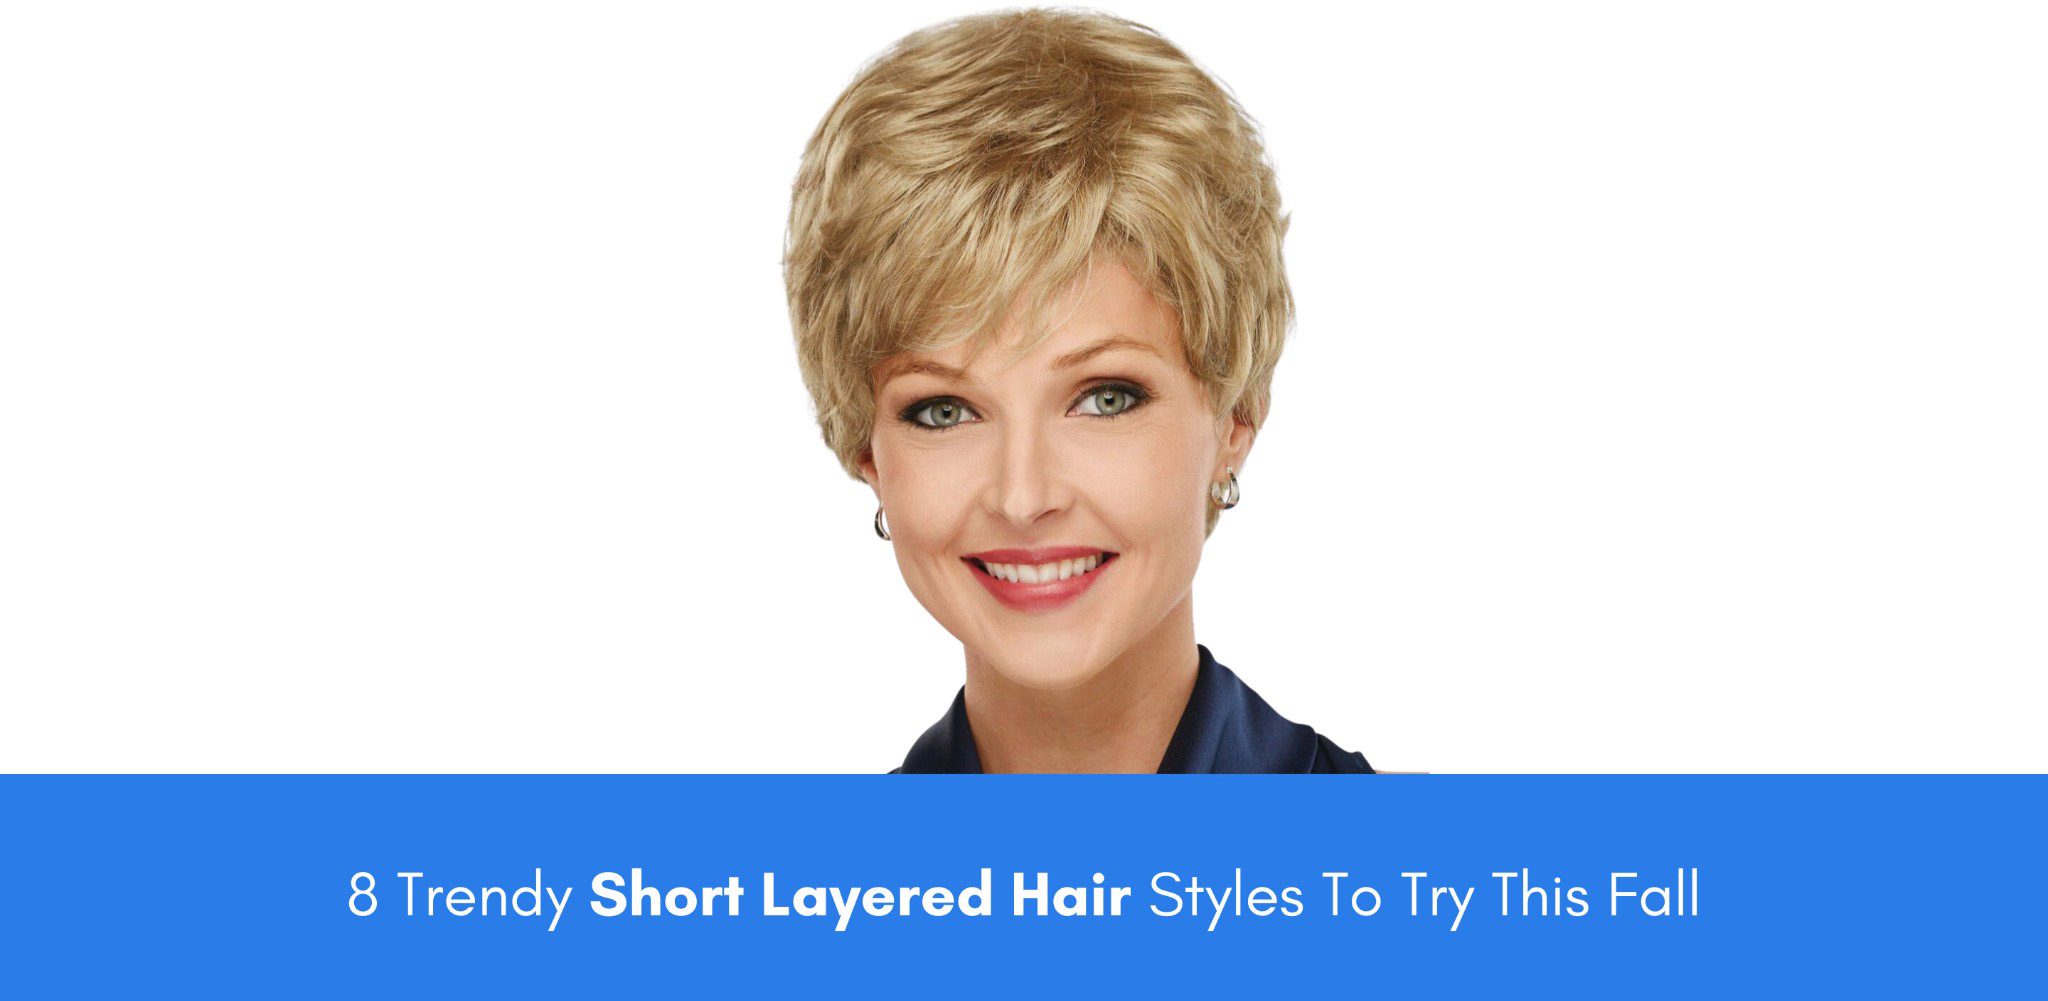 40 Cute and Easy-To-Style Short Layered Hairstyles - Hairstyle Inspirations  f… | Short layered haircuts, Layered haircuts with bangs, Cute hairstyles  for short hair